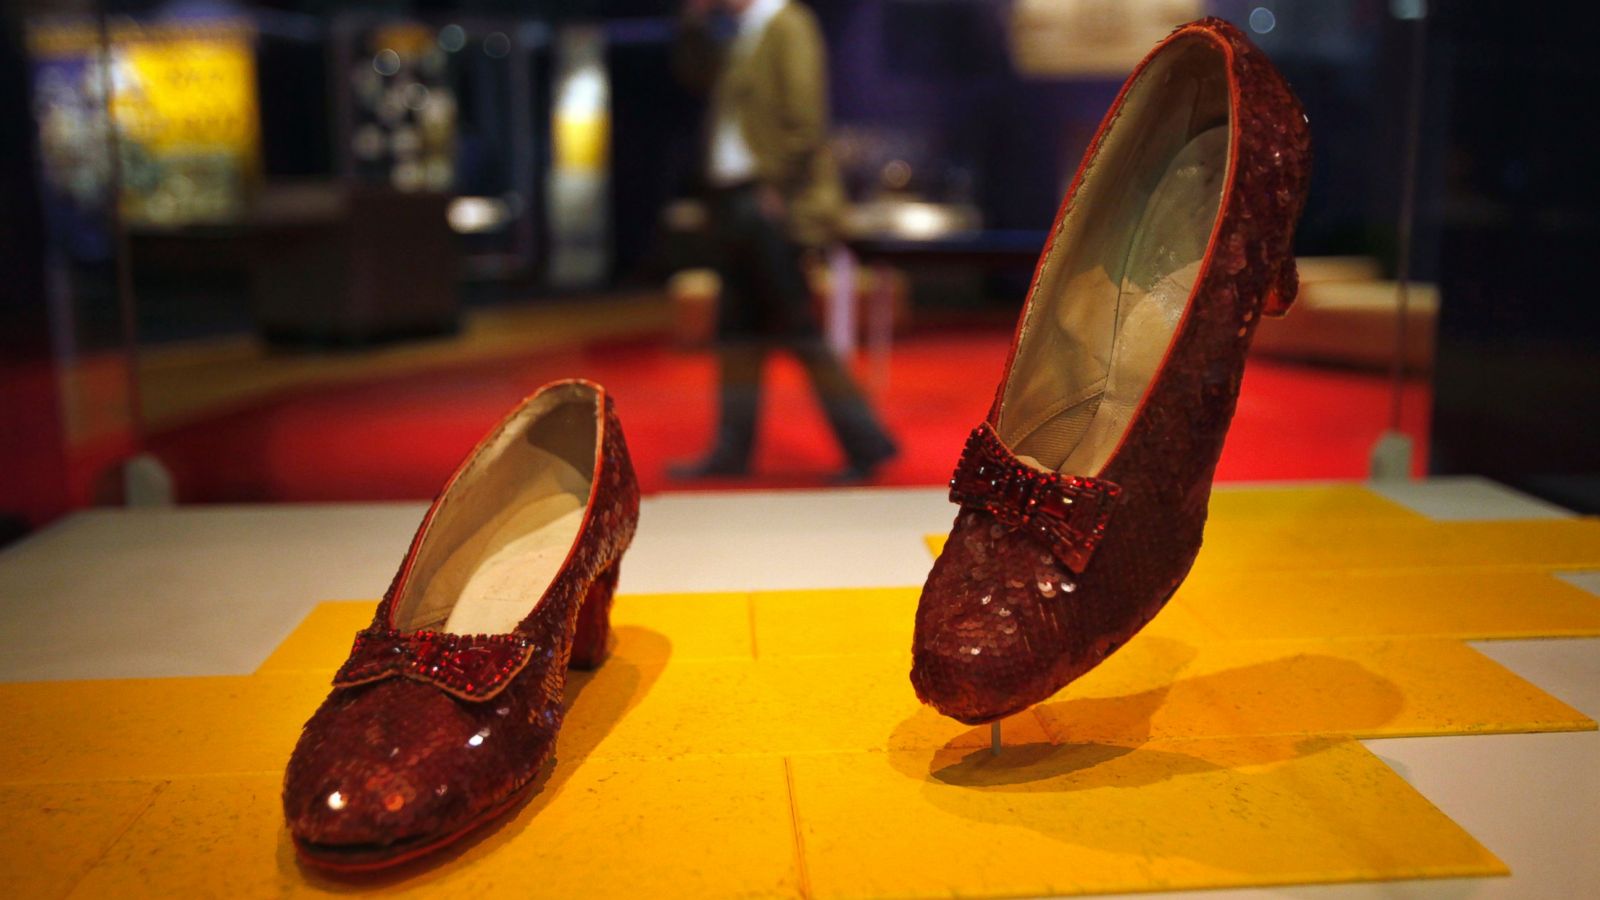 Officials show off stolen ruby slippers from 'Wizard of Oz' found after 13  years - ABC News